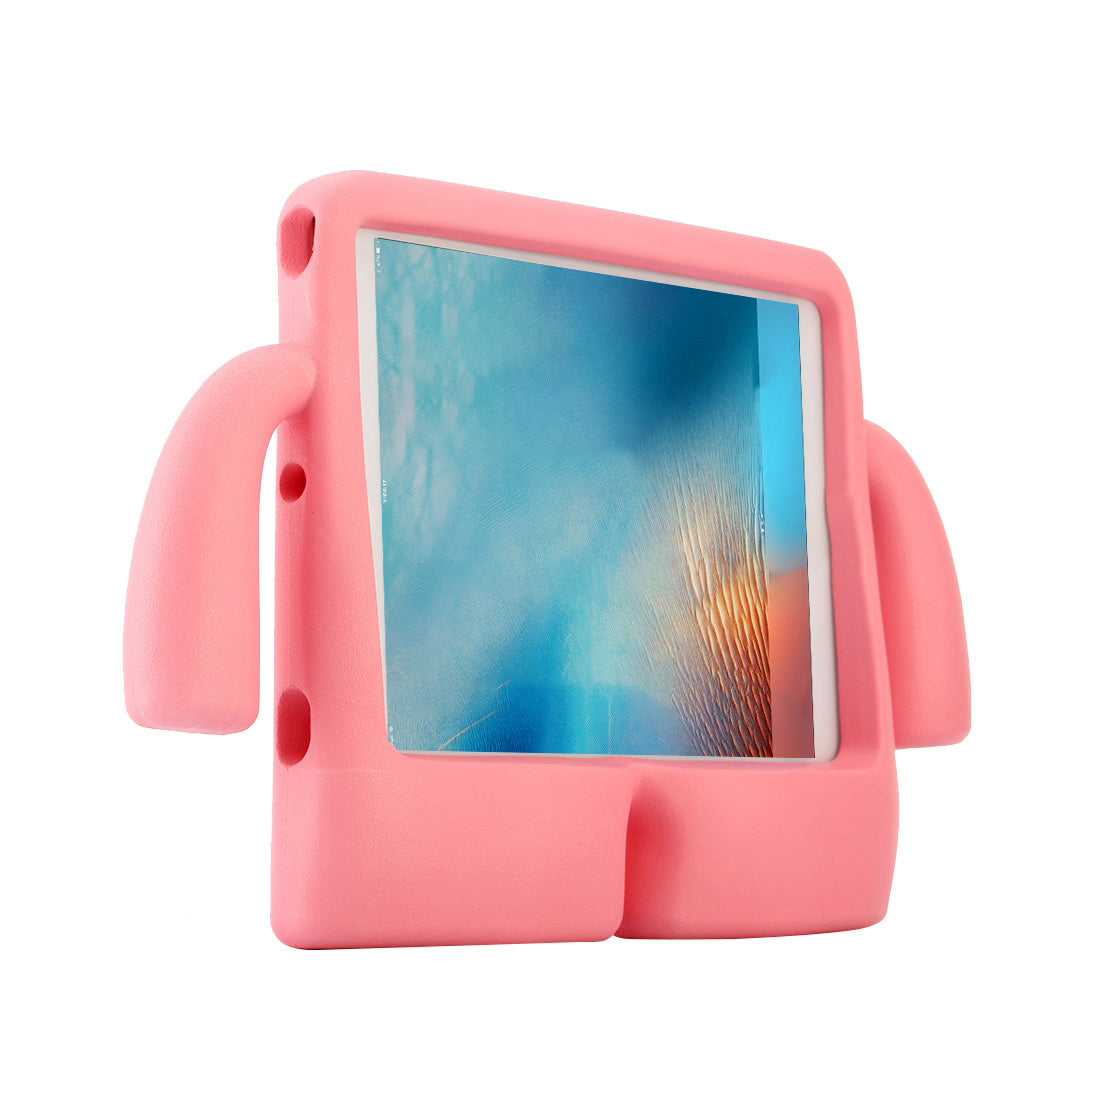 For Samsung Galaxy Tab A7 10.4 2020 Kids Case Shockproof Cover With Carry Handle - Pink